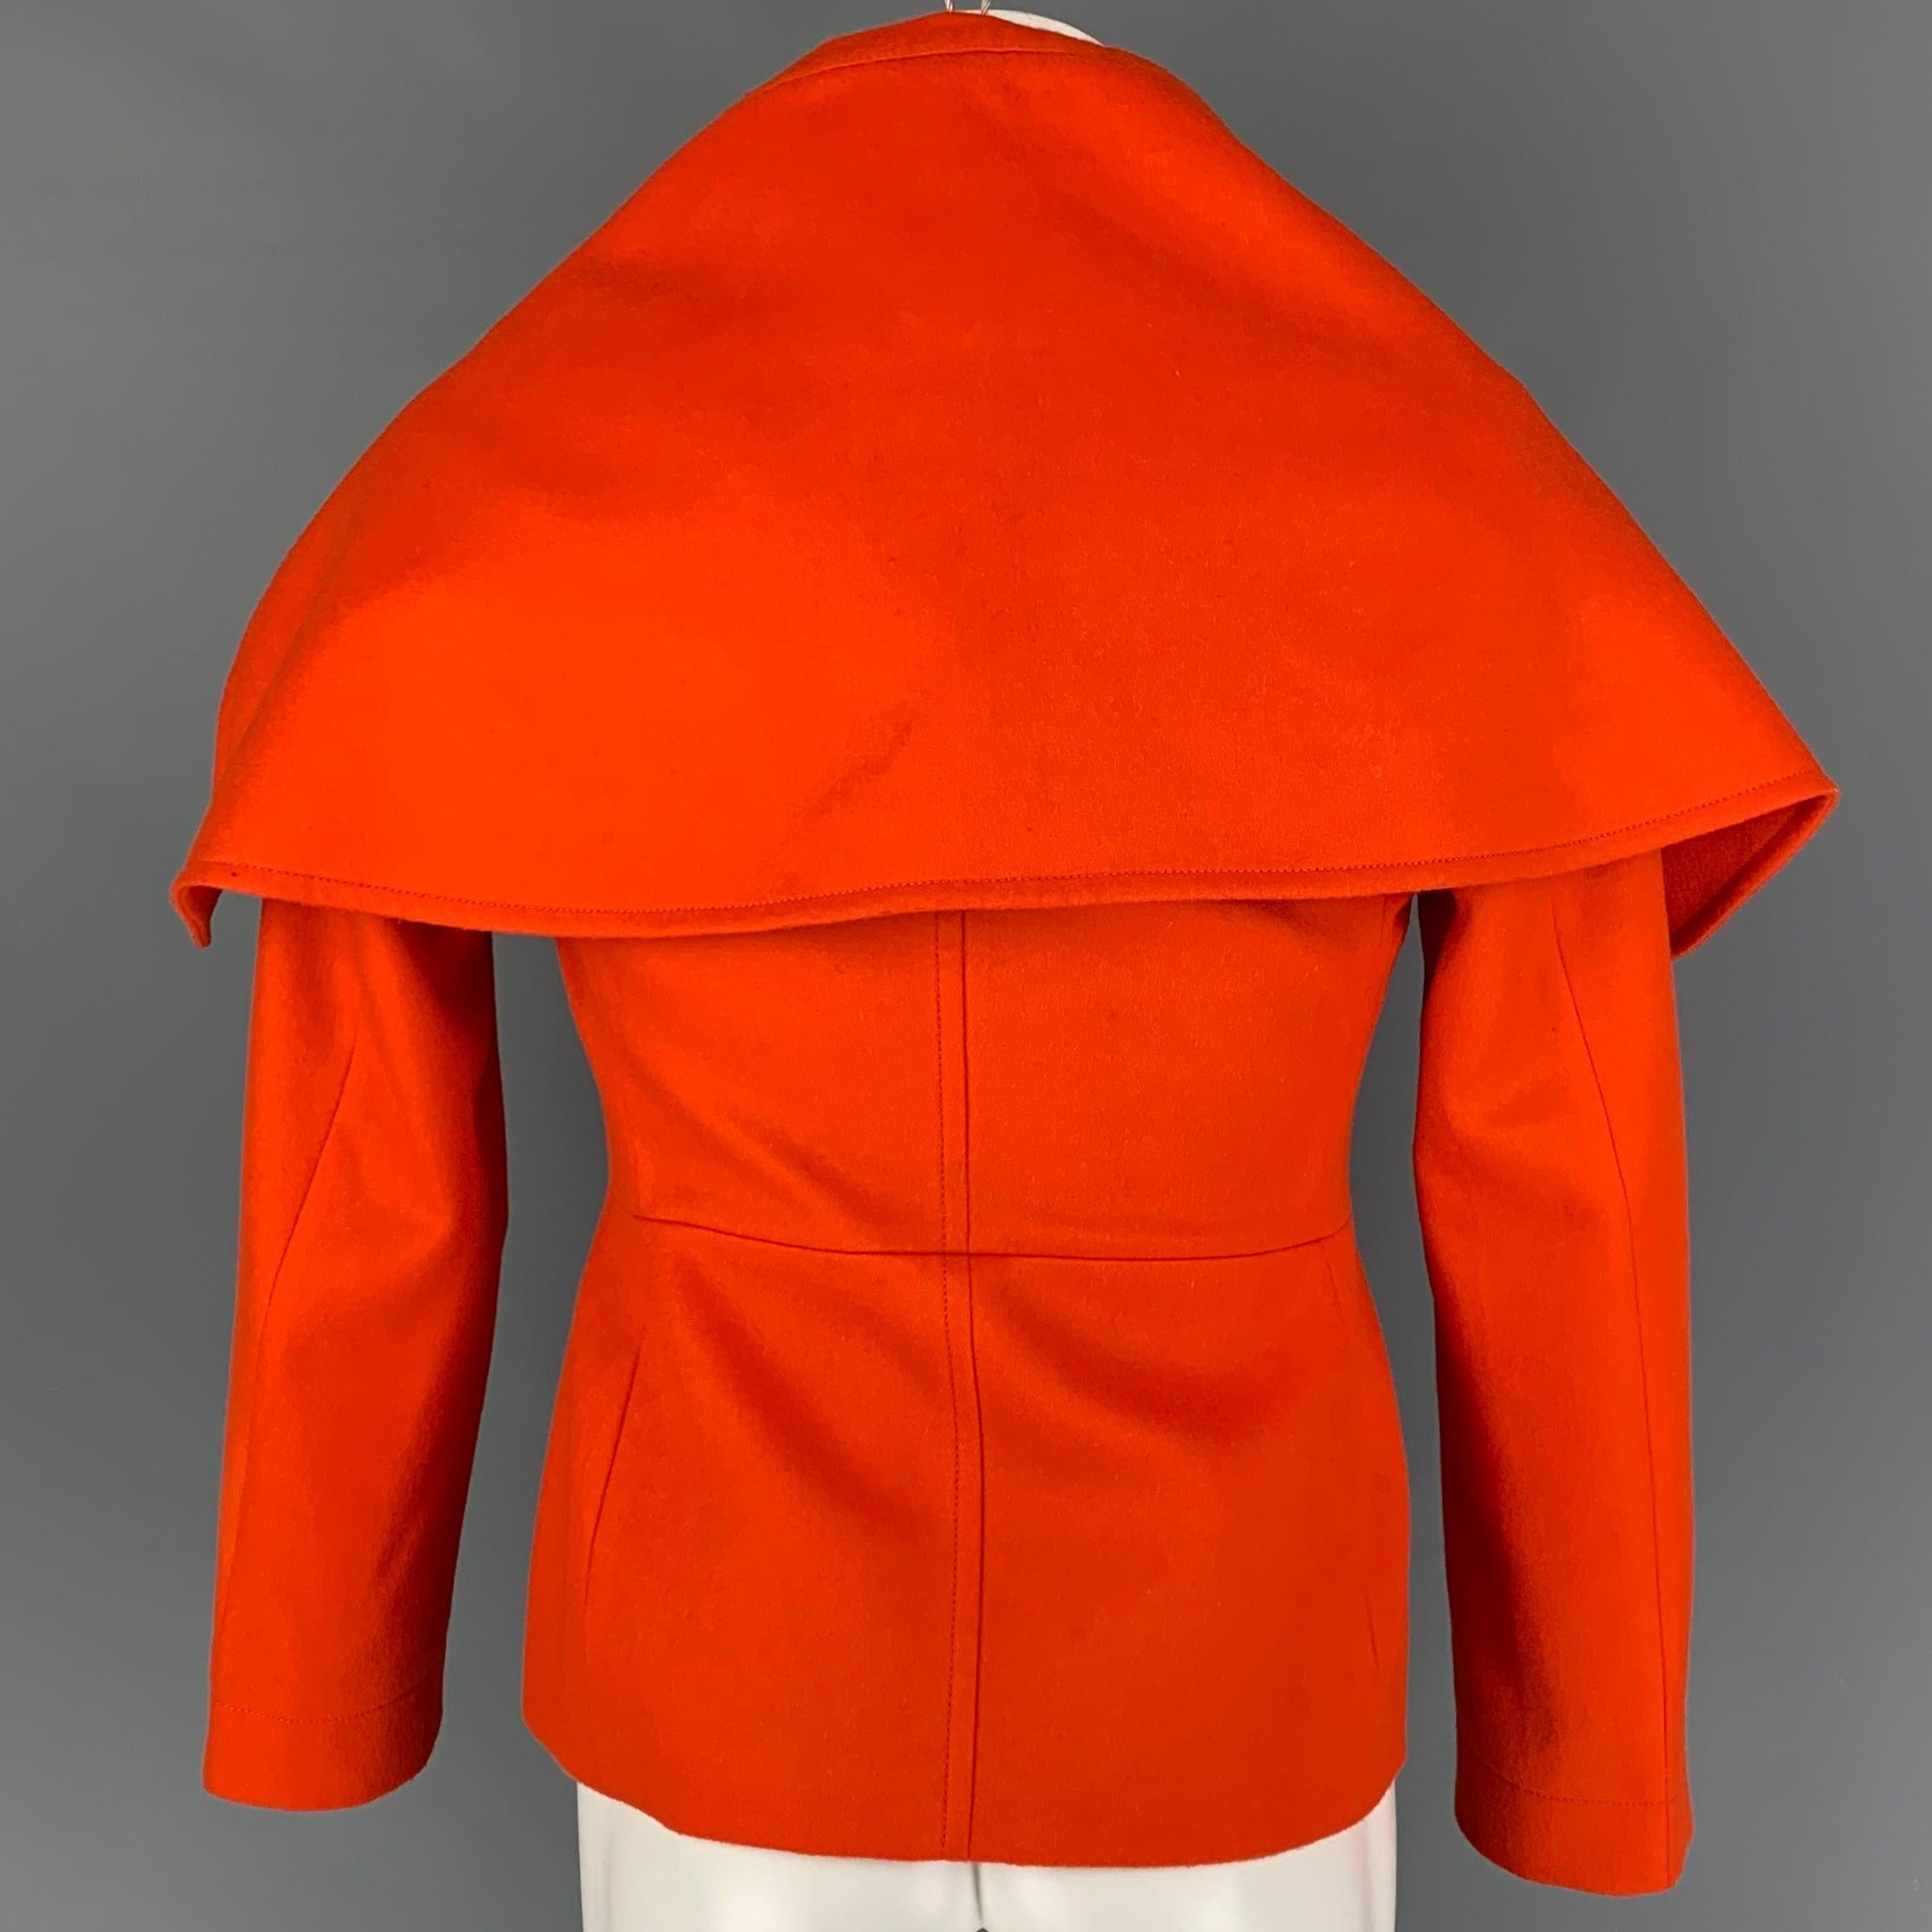 WALTER VAN BEIRENDONCK FW 19 Size 36 Orange Wool Double Breasted Jacket In Excellent Condition For Sale In San Francisco, CA